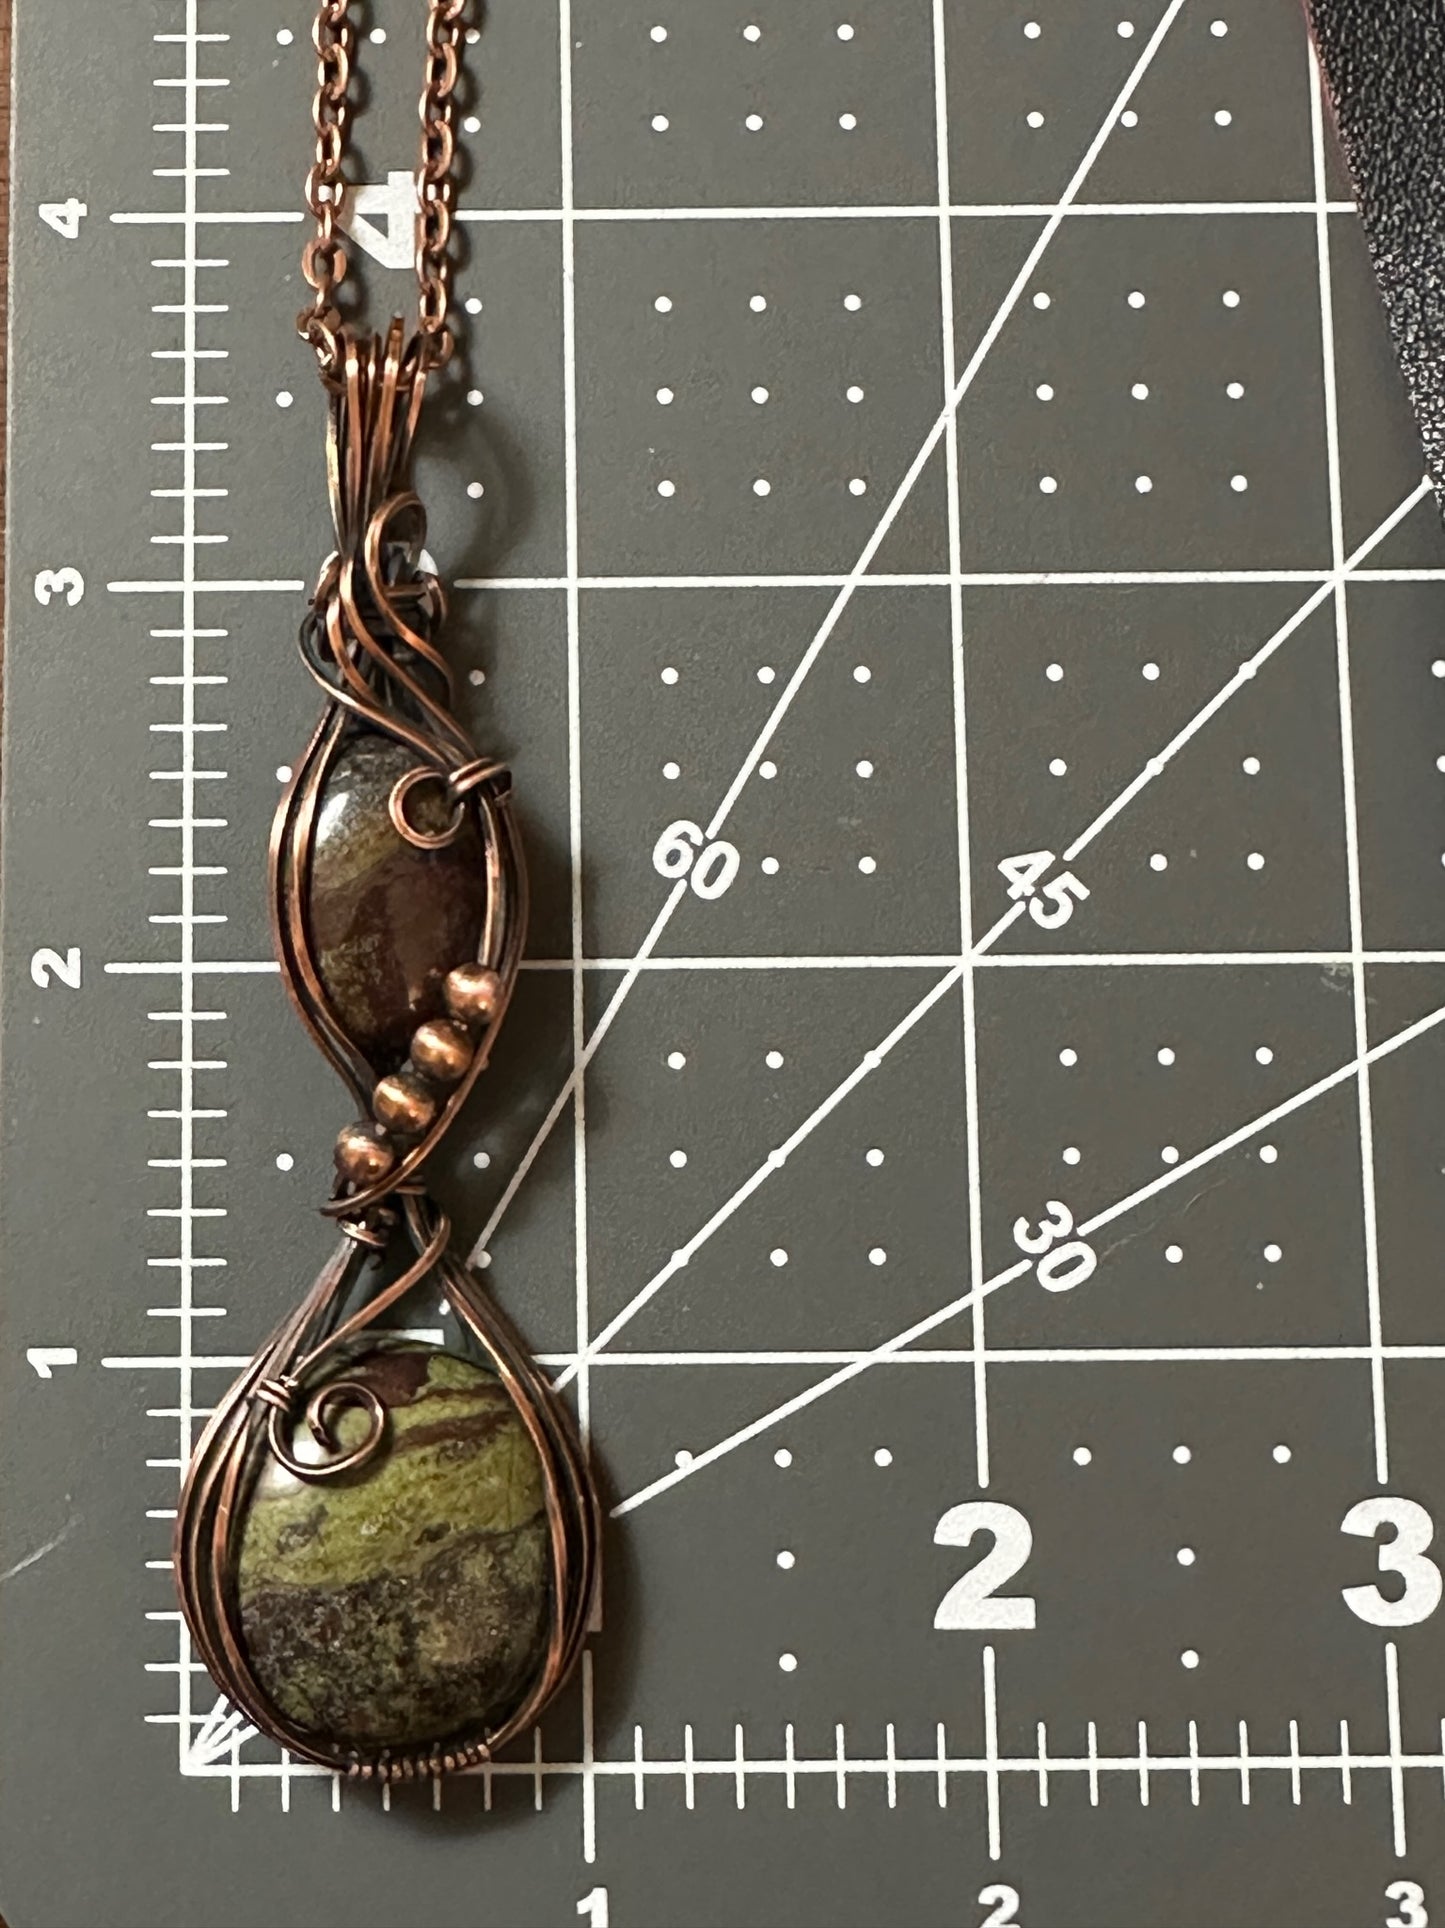 Double Dragon Blood Wire Wrapped Statement Pendant